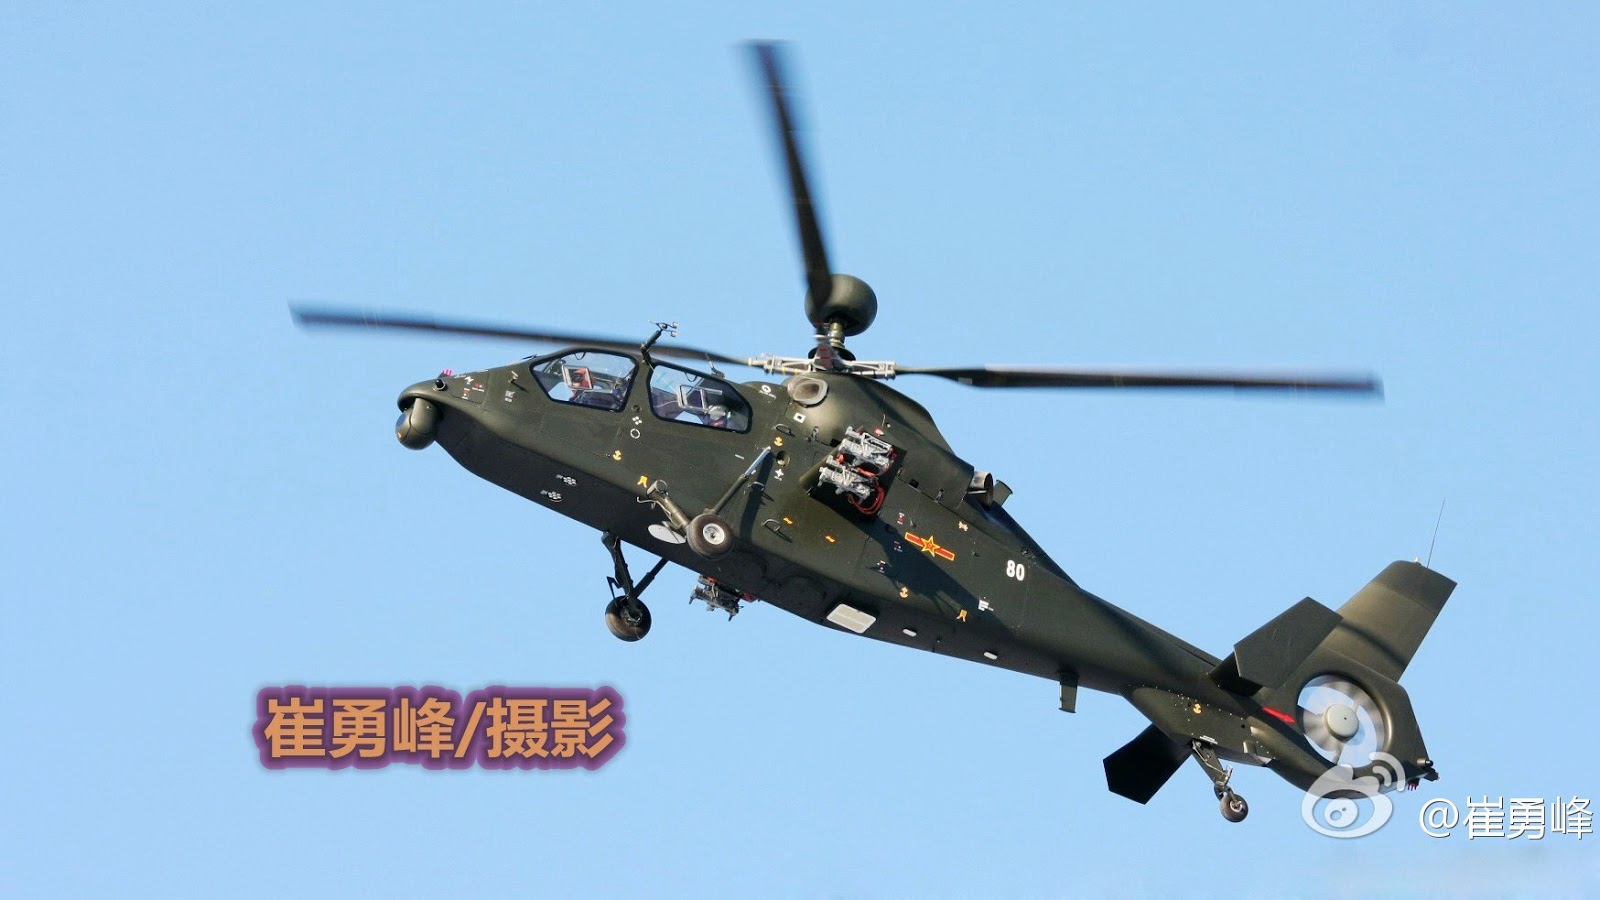 Z-19+++MMR+-+Z-19+attack+helicopter+gunship+Chinese+HAIC+W+People's+Liberation+Army+(PLA)+export+anti+tank+missile+armor+aff+(270262135)pakistan+army+ah-1missile+Fire+Control+Rada.jpg